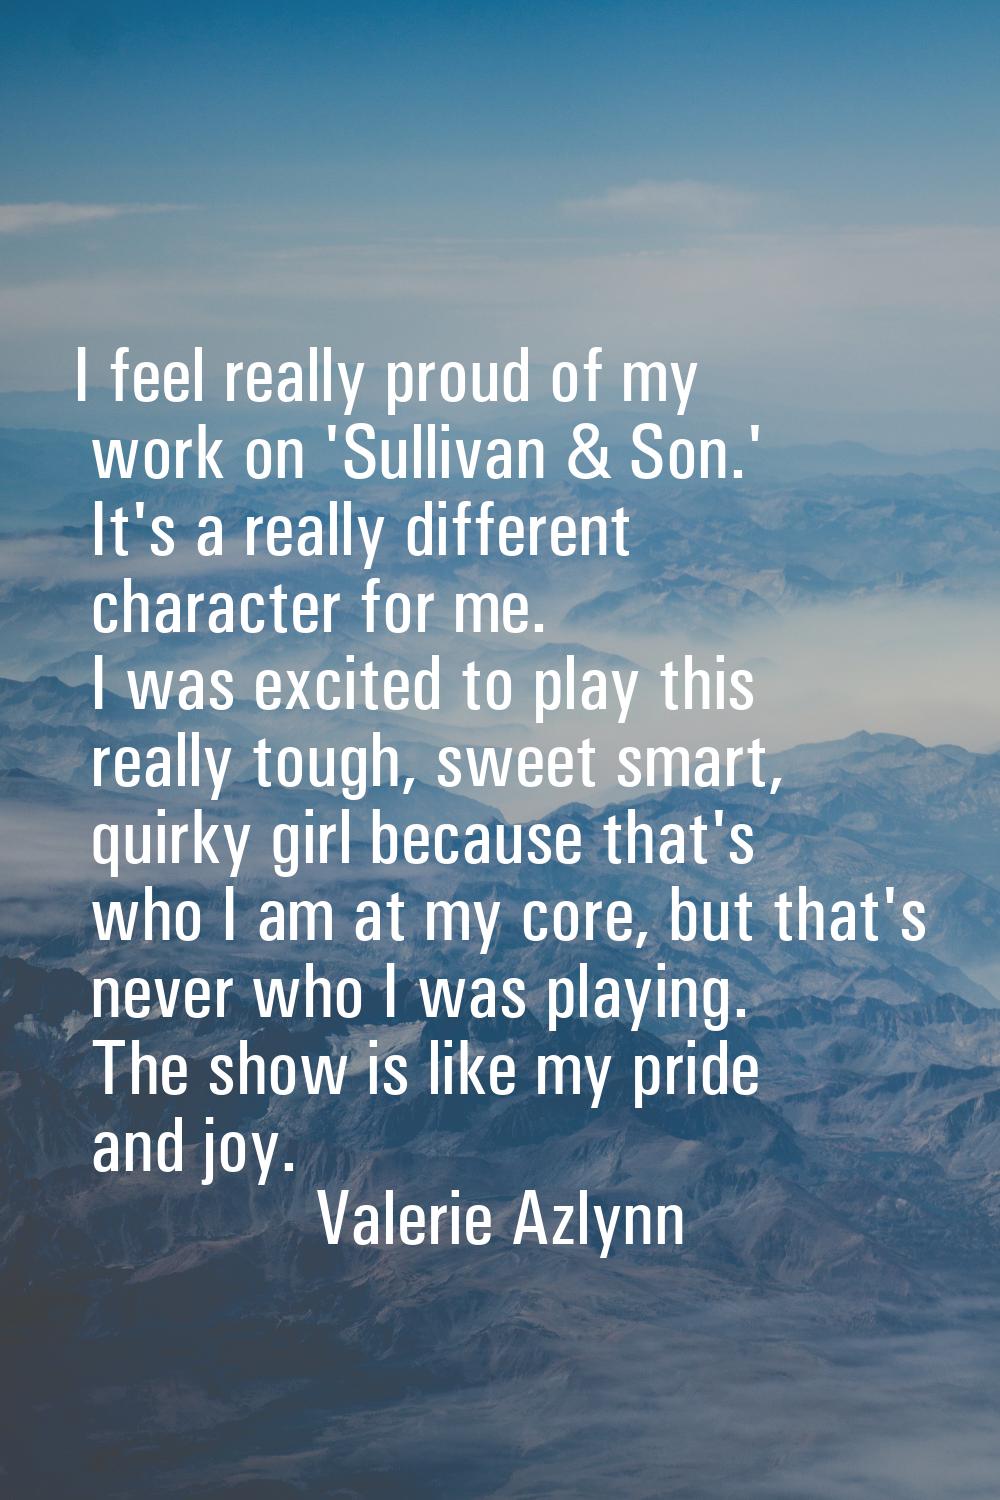 I feel really proud of my work on 'Sullivan & Son.' It's a really different character for me. I was